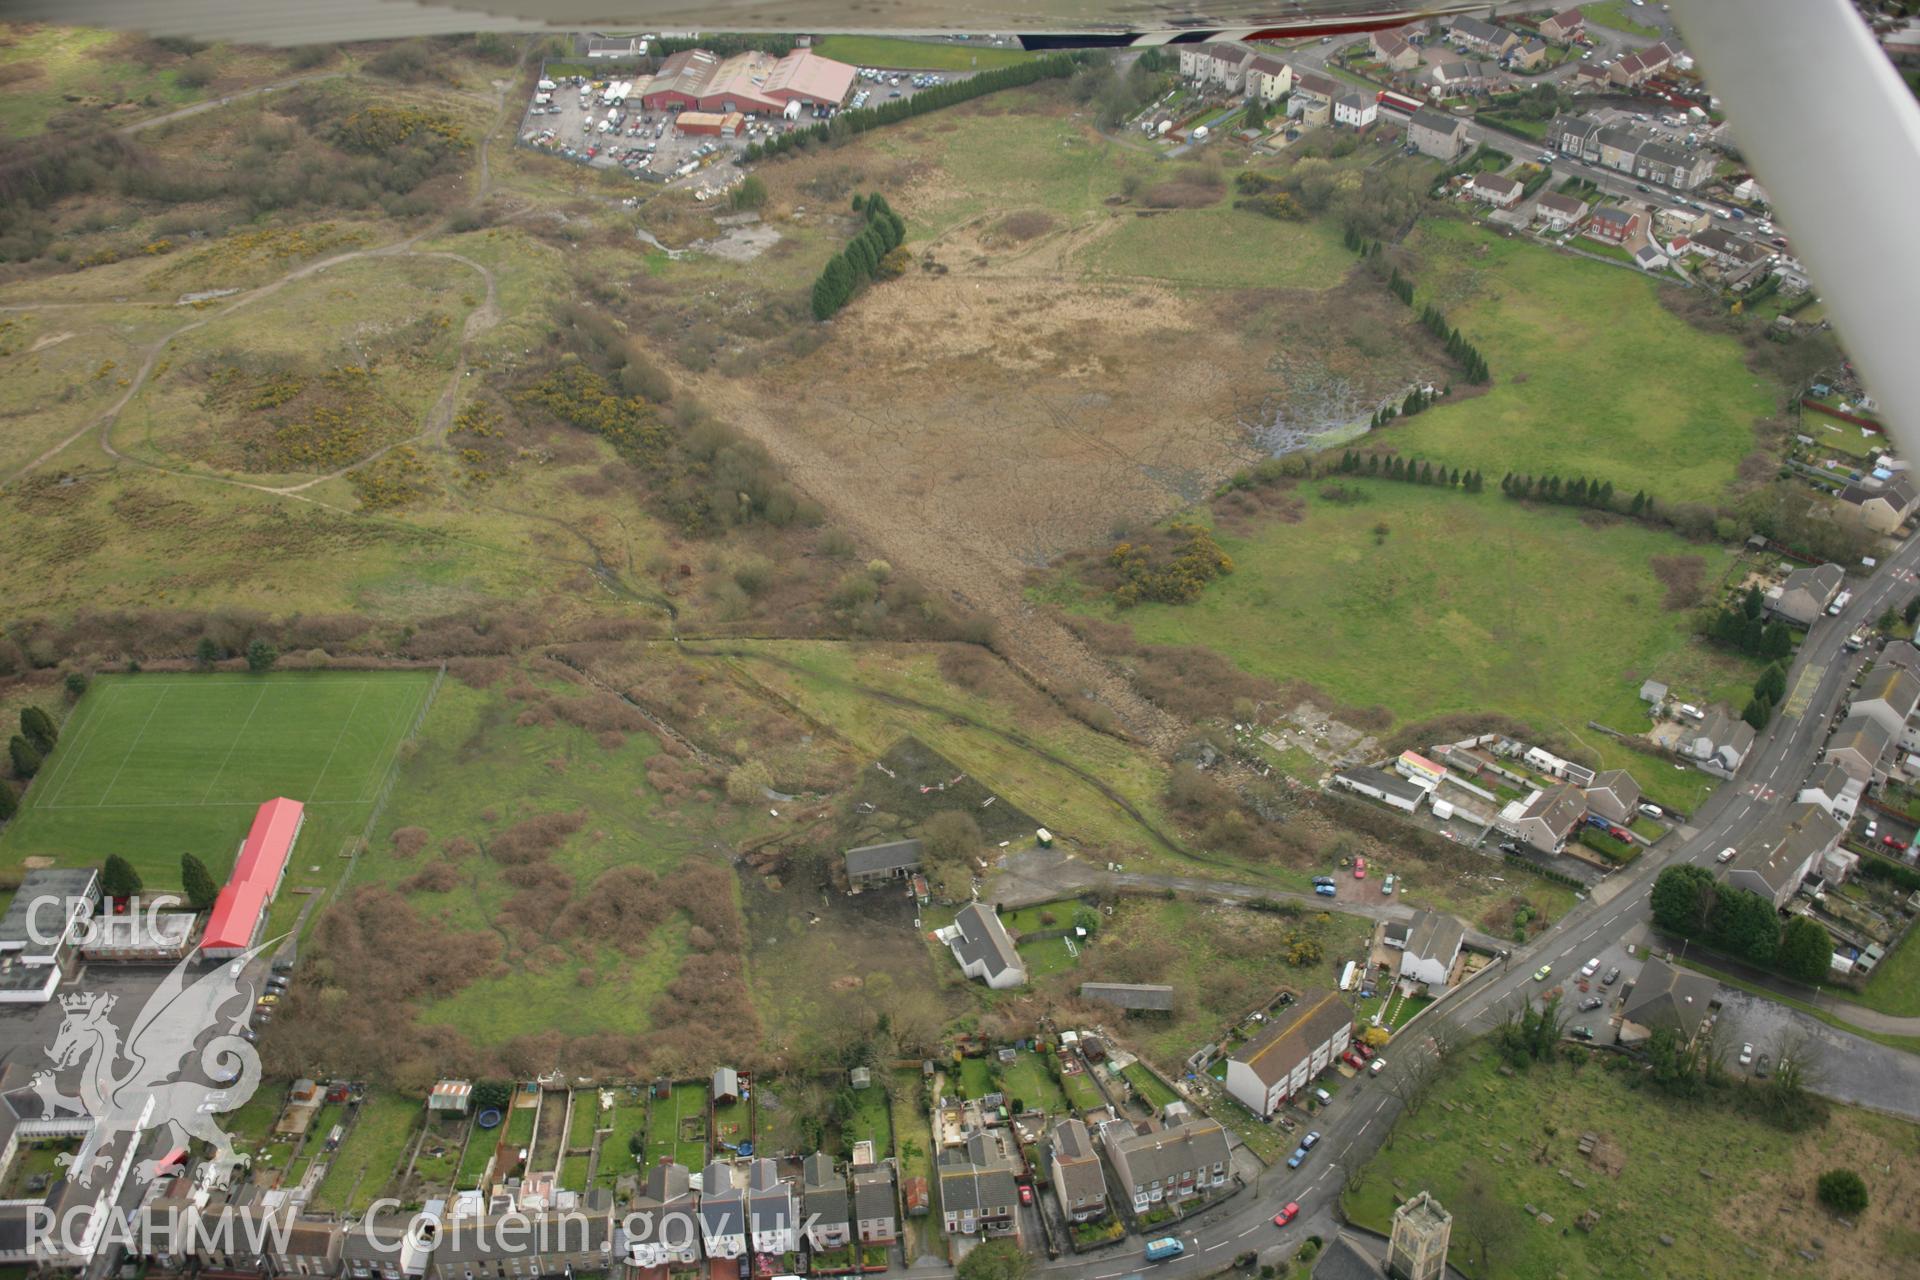 RCAHMW colour oblique aerial photograph of St Samlet's Church, Llansamlet, with the former line of the canal visible. Taken on 16 March 2007 by Toby Driver